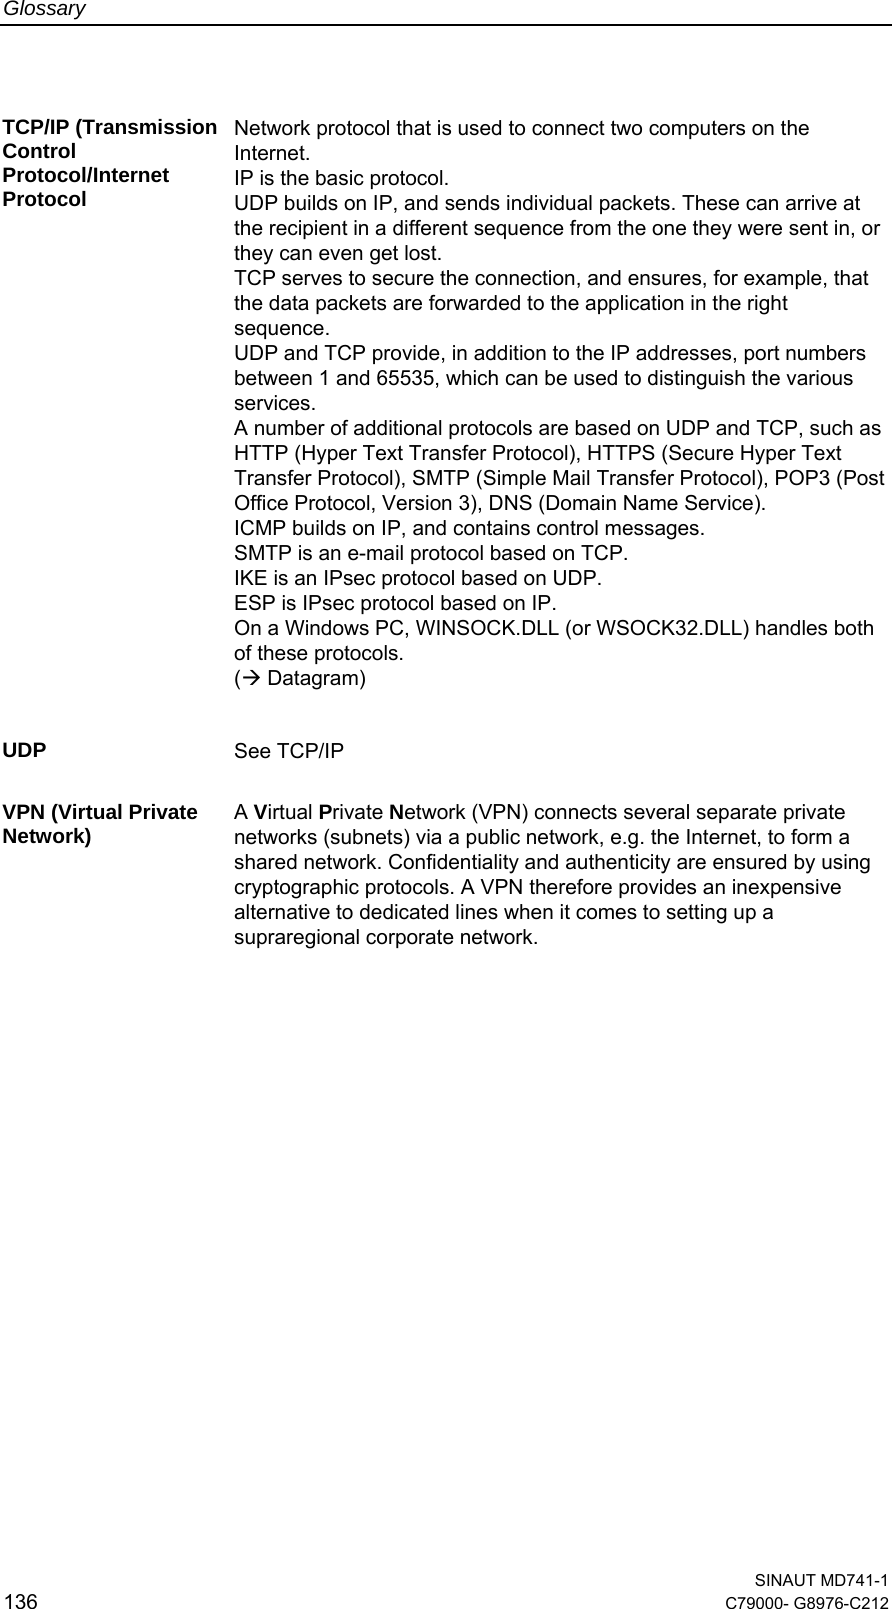 Glossary  SINAUT MD741-1 136  C79000- G8976-C212   TCP/IP (Transmission Control Protocol/Internet Protocol Network protocol that is used to connect two computers on the Internet. IP is the basic protocol. UDP builds on IP, and sends individual packets. These can arrive at the recipient in a different sequence from the one they were sent in, or they can even get lost. TCP serves to secure the connection, and ensures, for example, that the data packets are forwarded to the application in the right sequence.  UDP and TCP provide, in addition to the IP addresses, port numbers between 1 and 65535, which can be used to distinguish the various services. A number of additional protocols are based on UDP and TCP, such as HTTP (Hyper Text Transfer Protocol), HTTPS (Secure Hyper Text Transfer Protocol), SMTP (Simple Mail Transfer Protocol), POP3 (Post Office Protocol, Version 3), DNS (Domain Name Service). ICMP builds on IP, and contains control messages. SMTP is an e-mail protocol based on TCP. IKE is an IPsec protocol based on UDP. ESP is IPsec protocol based on IP. On a Windows PC, WINSOCK.DLL (or WSOCK32.DLL) handles both of these protocols.  (Æ Datagram)    UDP  See TCP/IP  VPN (Virtual Private Network)  A Virtual Private Network (VPN) connects several separate private networks (subnets) via a public network, e.g. the Internet, to form a shared network. Confidentiality and authenticity are ensured by using cryptographic protocols. A VPN therefore provides an inexpensive alternative to dedicated lines when it comes to setting up a supraregional corporate network.  